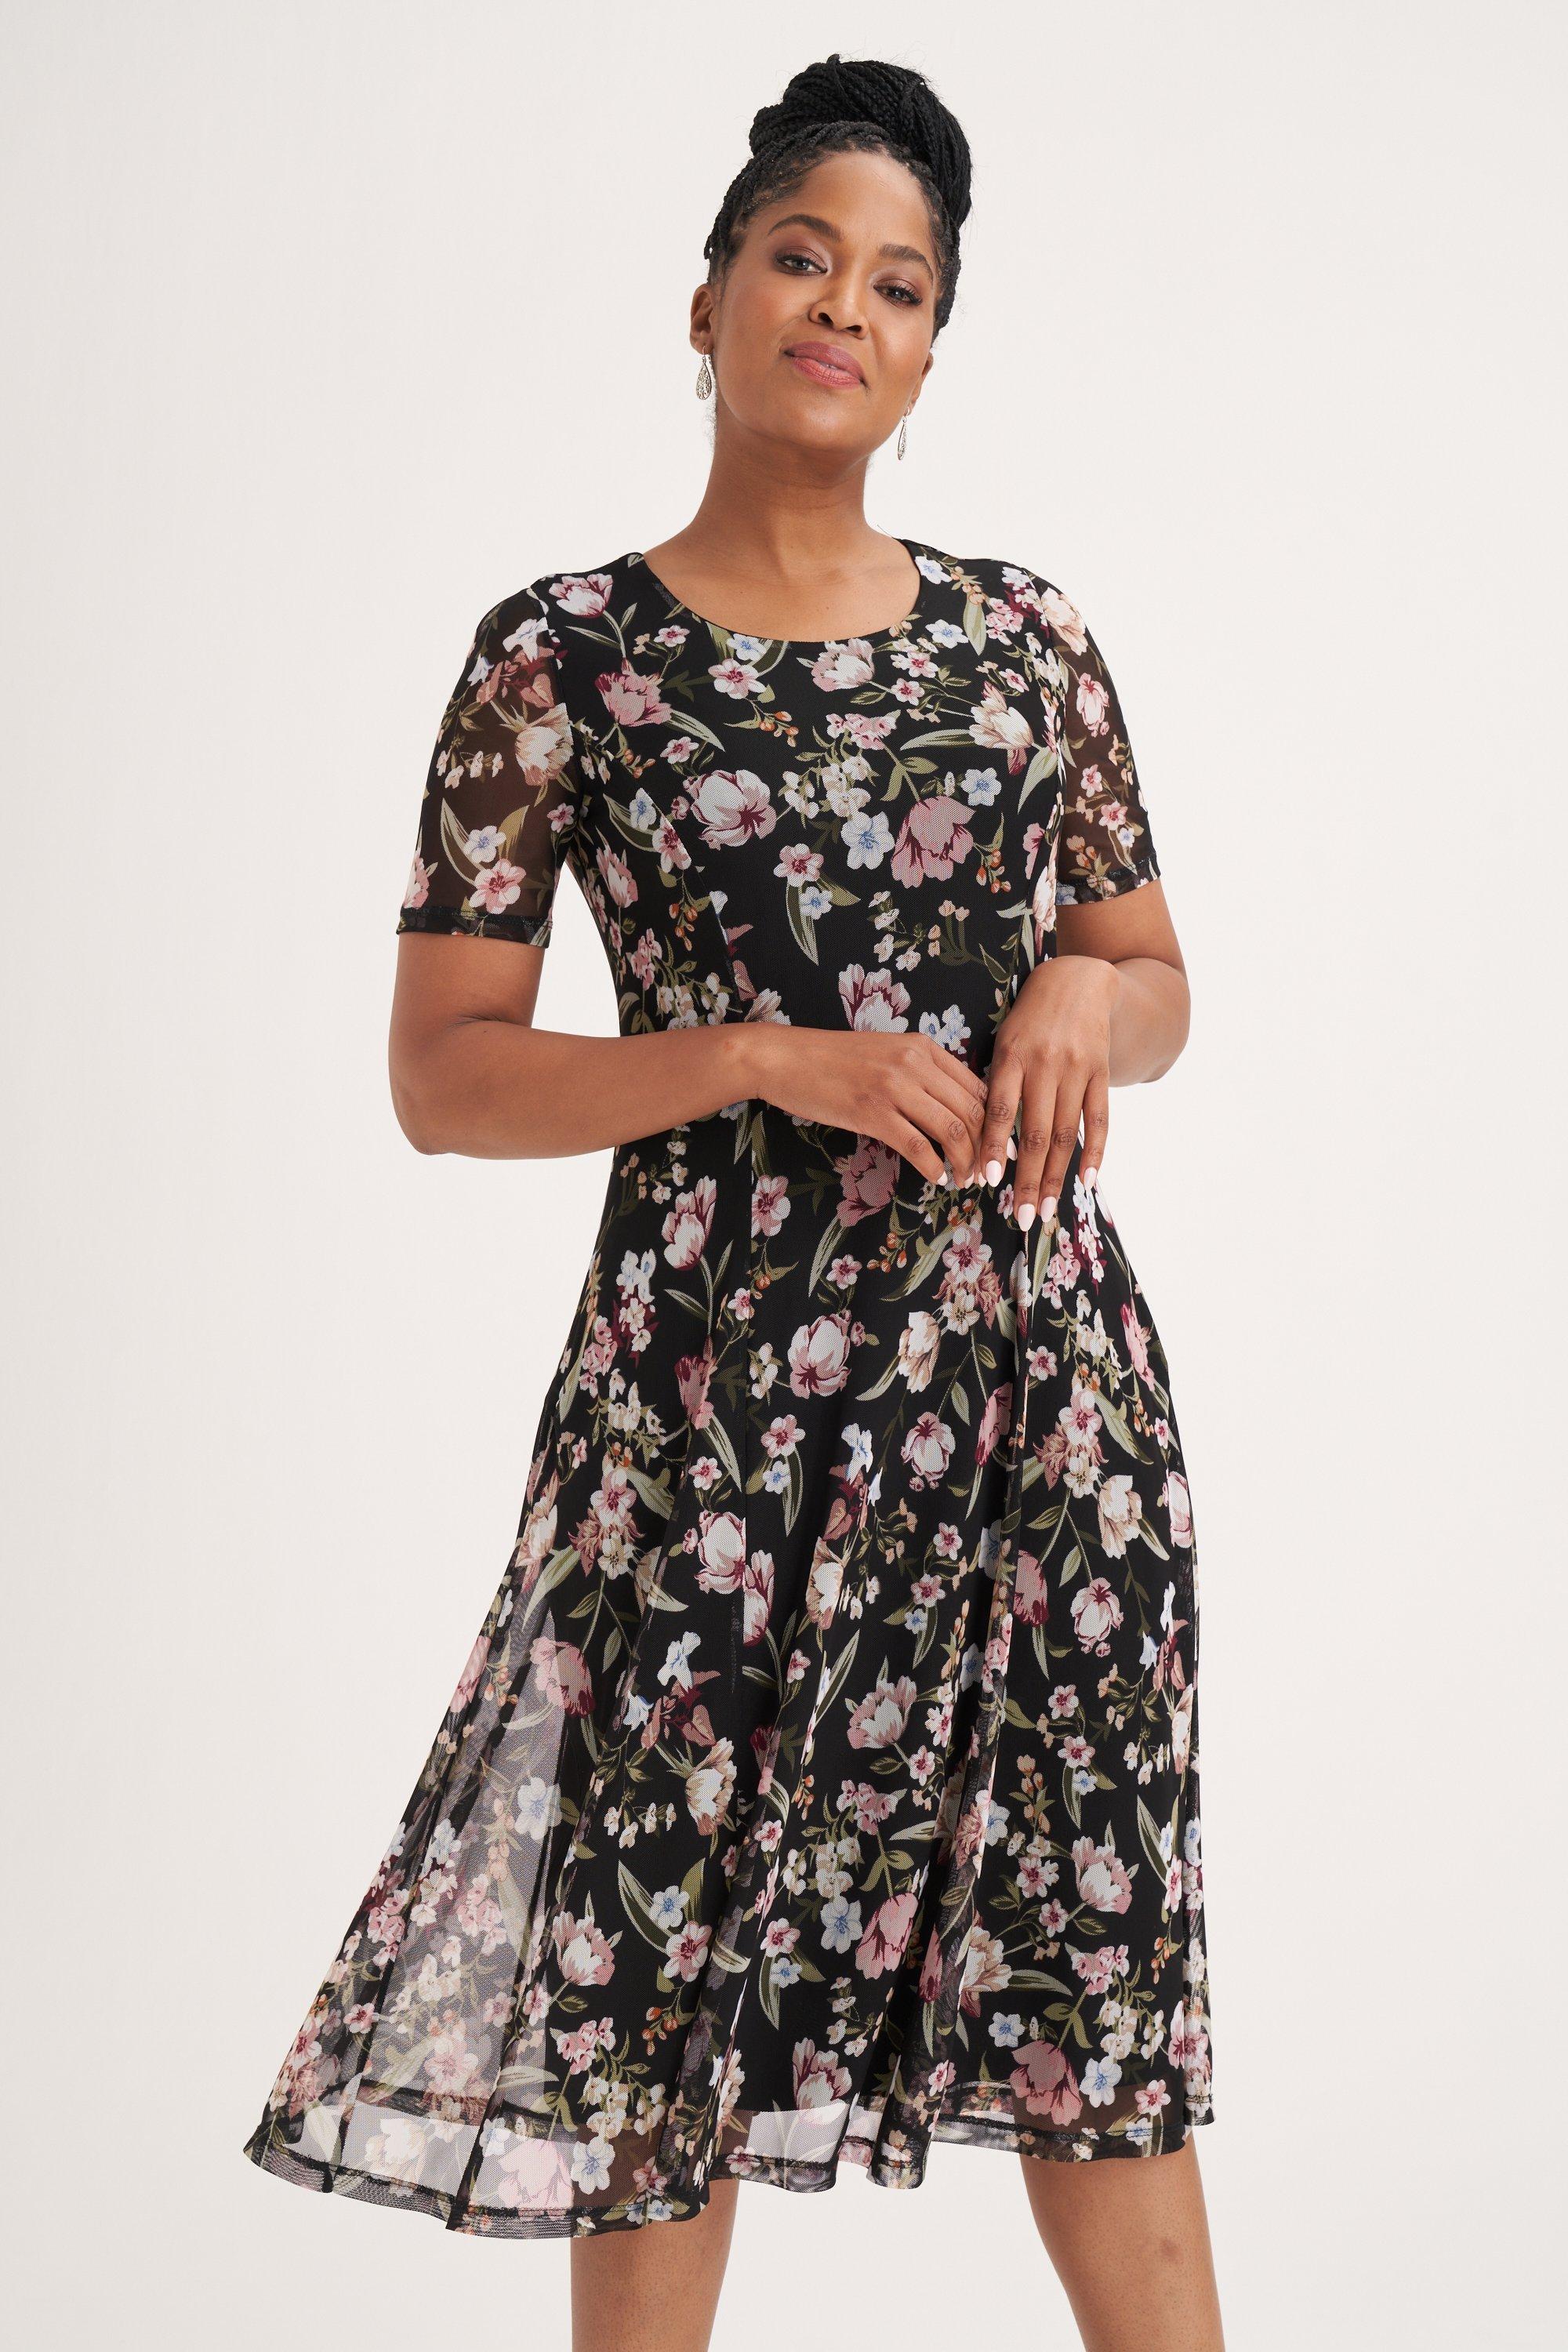 FLORAL MESH FIT AND FLARE DRESS